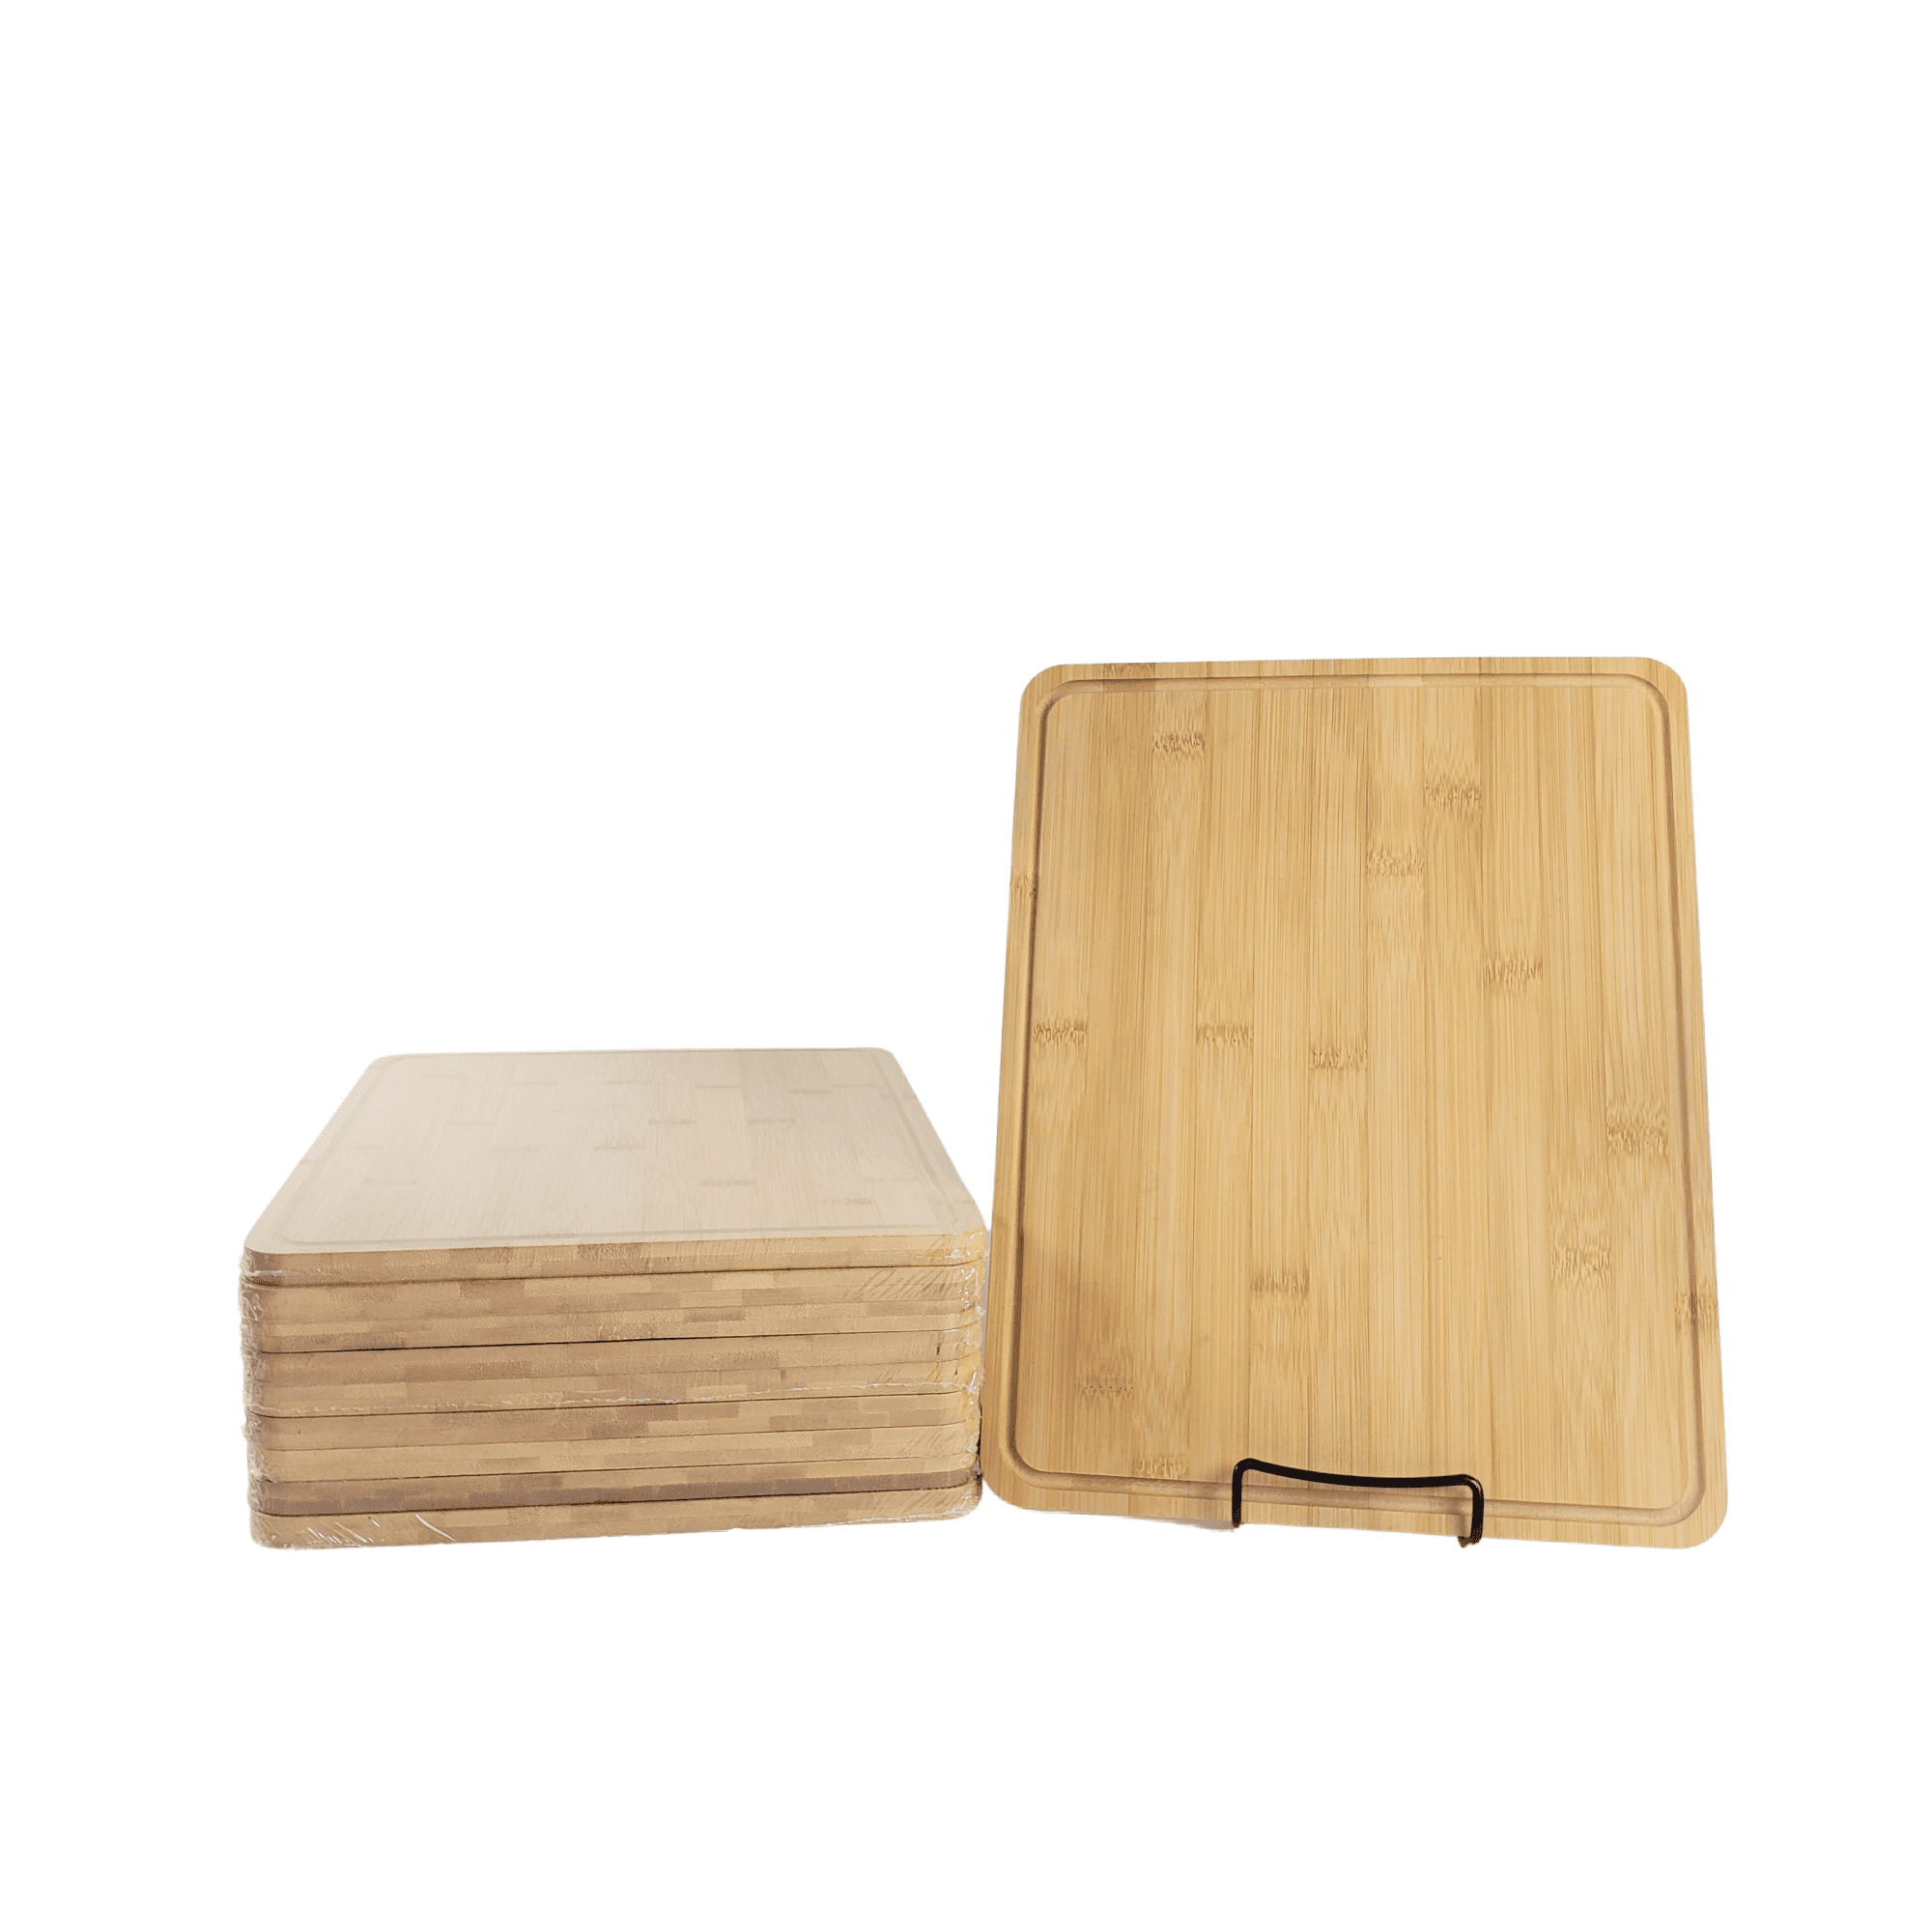 Bamboo Natural Wood Intelligent Chopping Block Cutting Board with